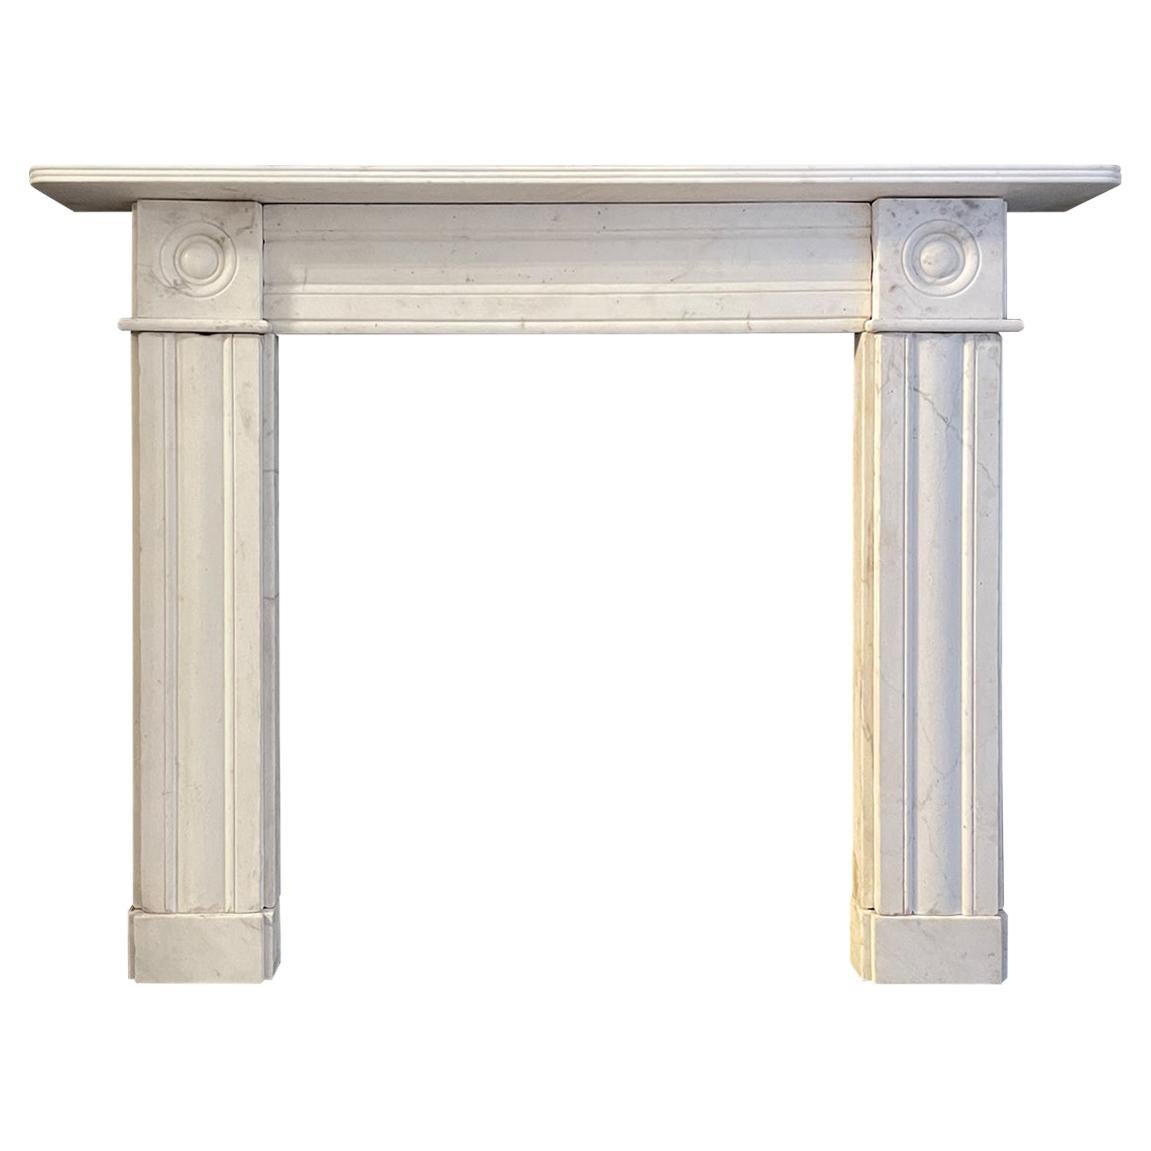 Early 19th Century Statuary White Marble Fireplace Mantel